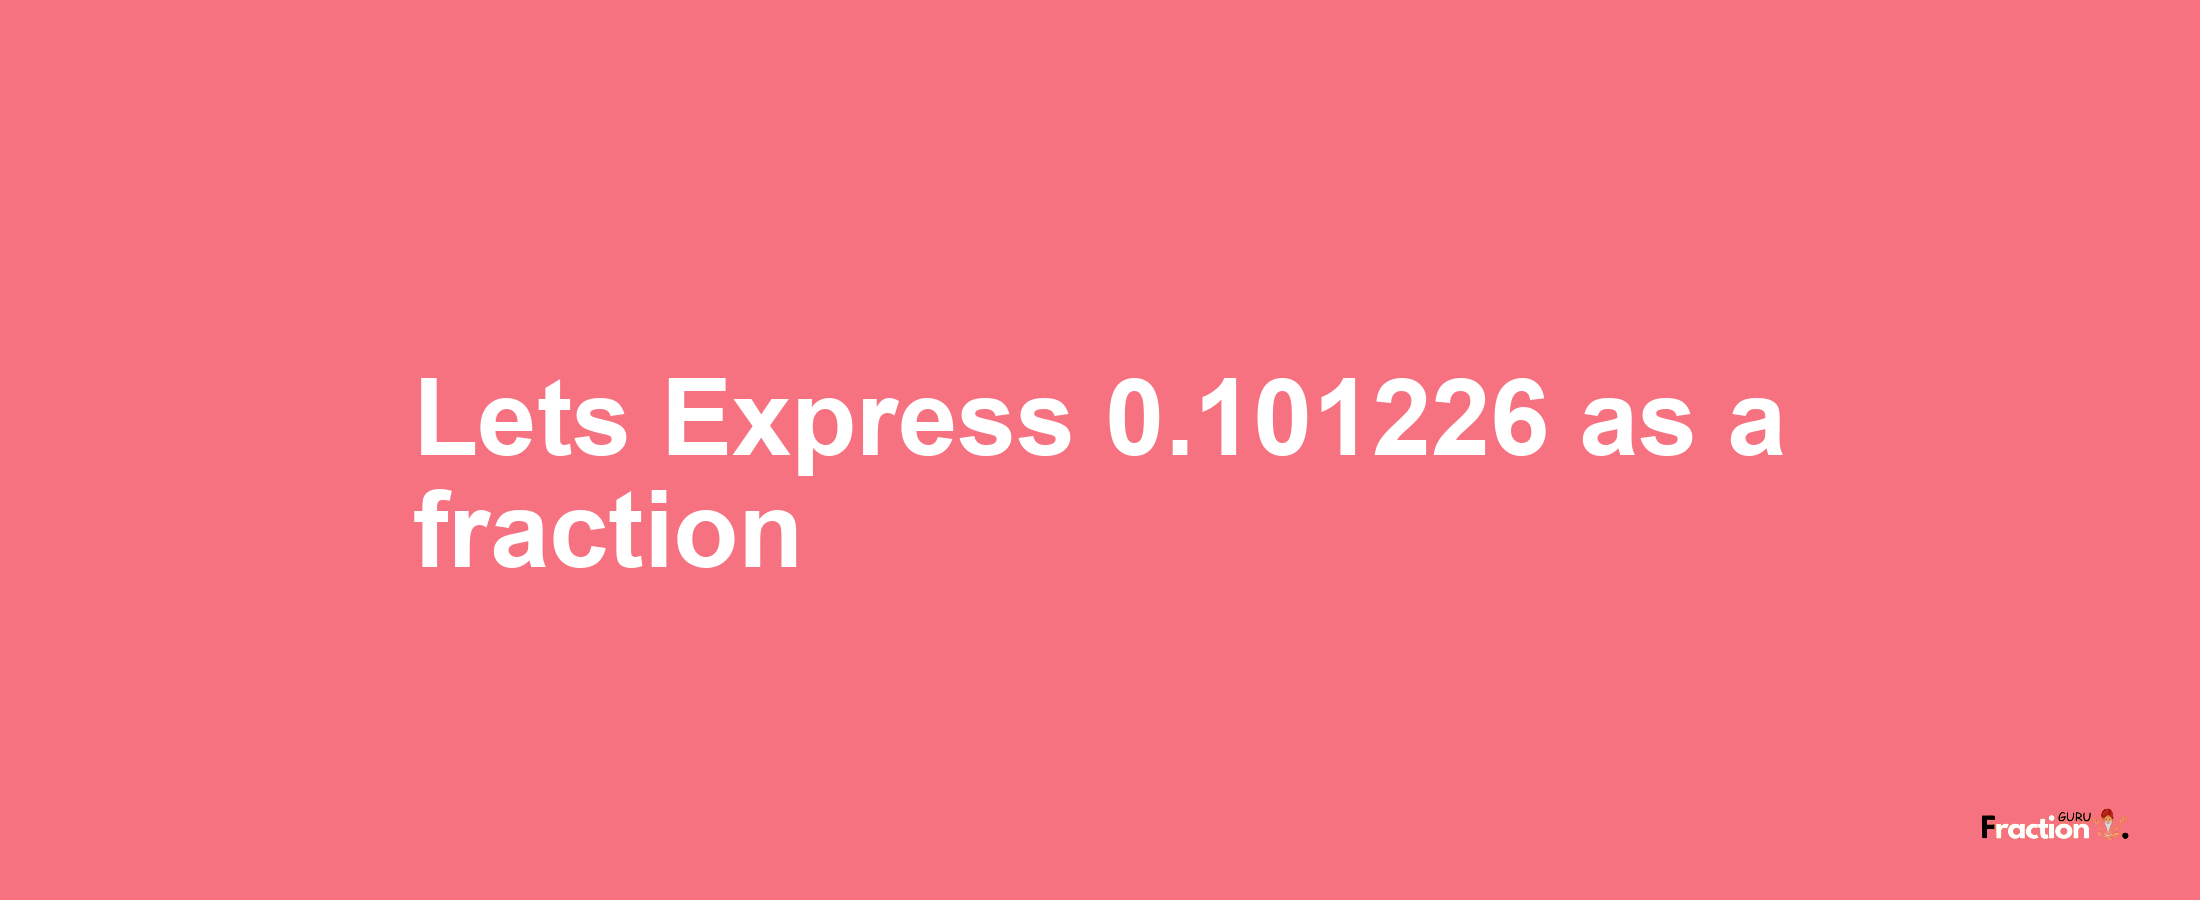 Lets Express 0.101226 as afraction